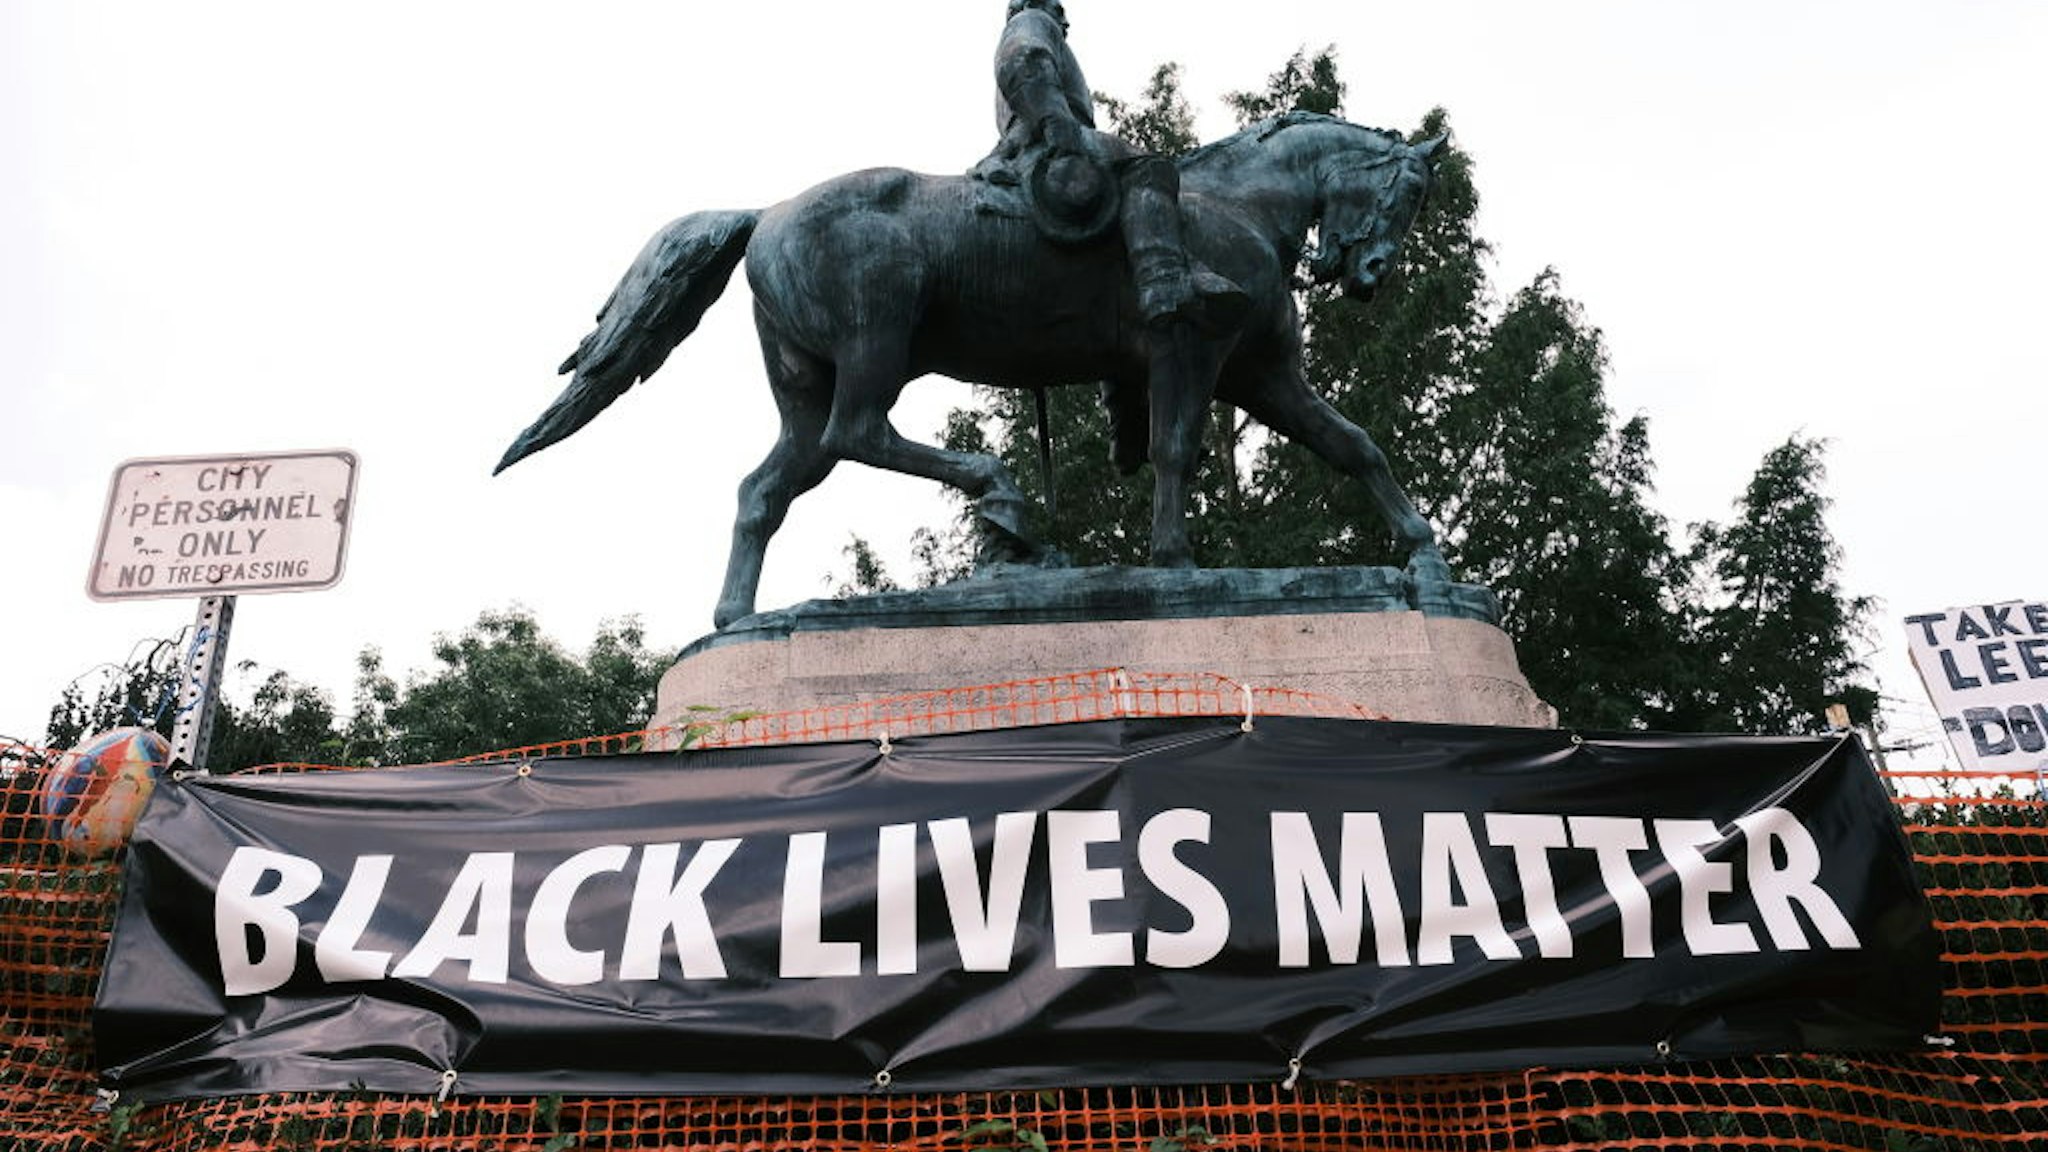 CHARLOTTESVILLE, VA - AUGUST 12: The statue of Robert E Lee with a banner that reads "Black Lives Matter" during the "Reclaim the Park" gathering at Emancipation Park on August 12, 2020 in Charlottesville, Virginia. Community members in Charlottesville collaborated with Congregate Cville and other Charlottesville organizations to put together the "Reclaim the Park" gathering to mark the third anniversary of a far-right rally on August 12, 2017.